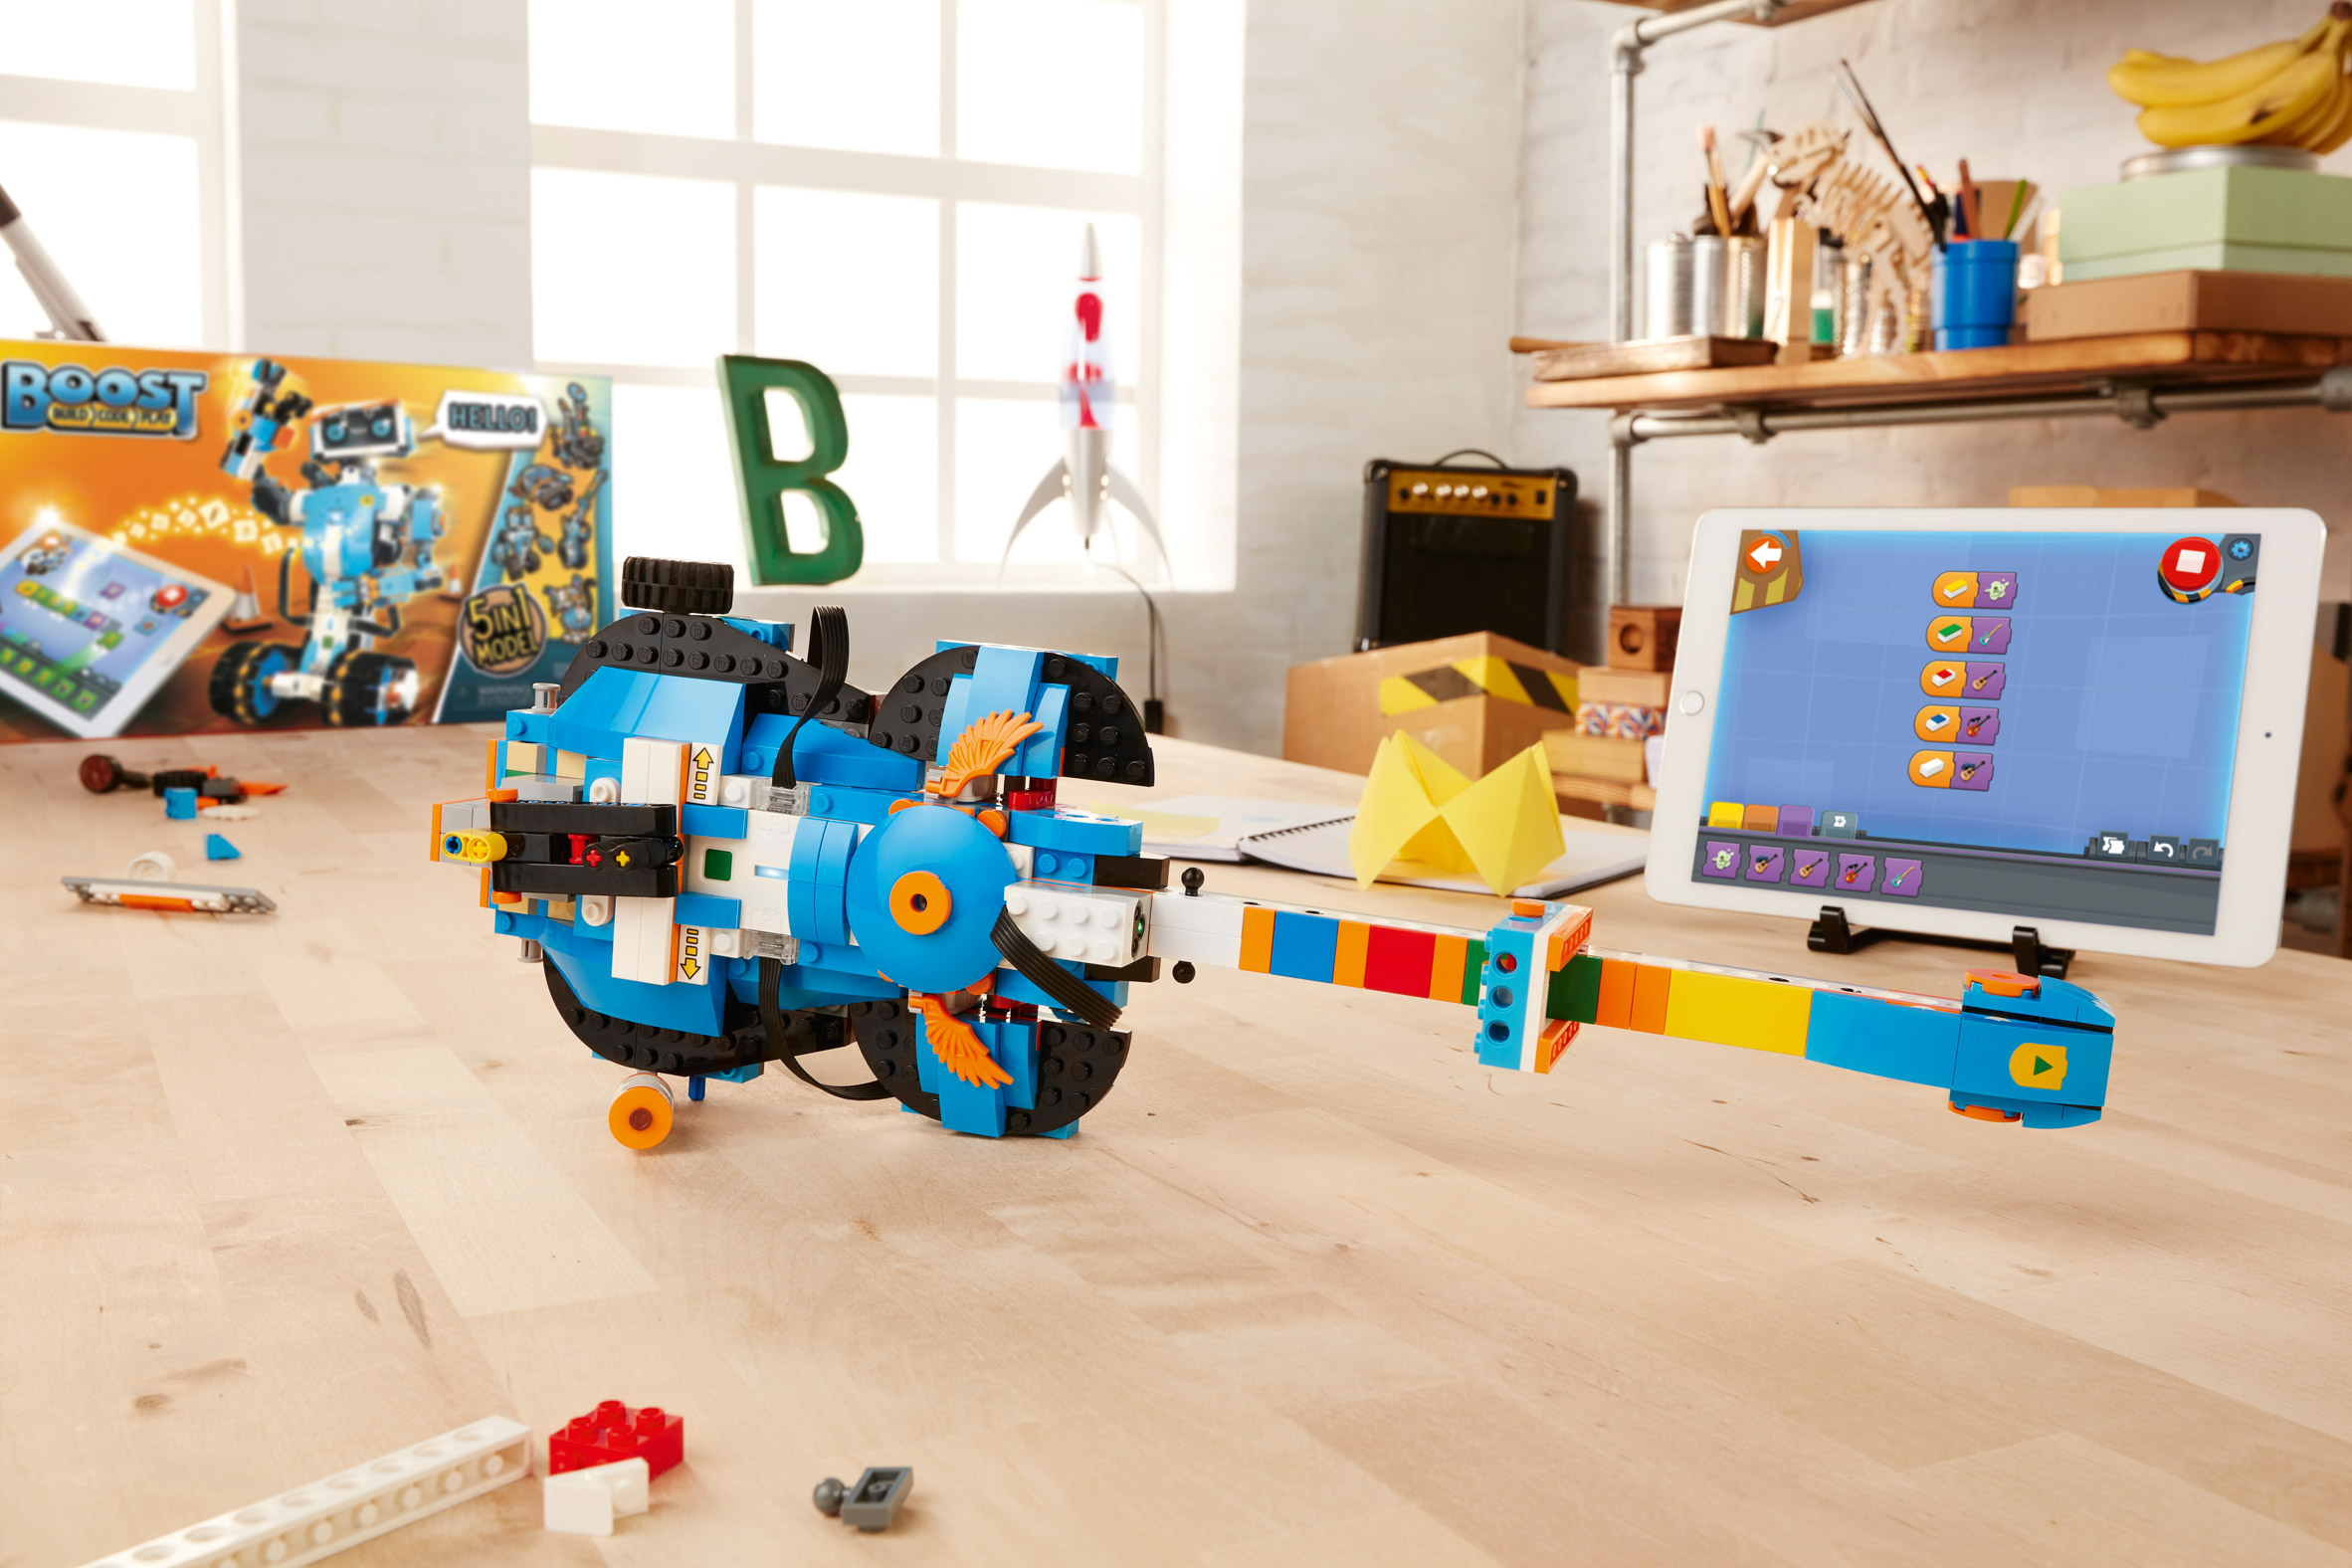 Lego Boost to help children learn coding